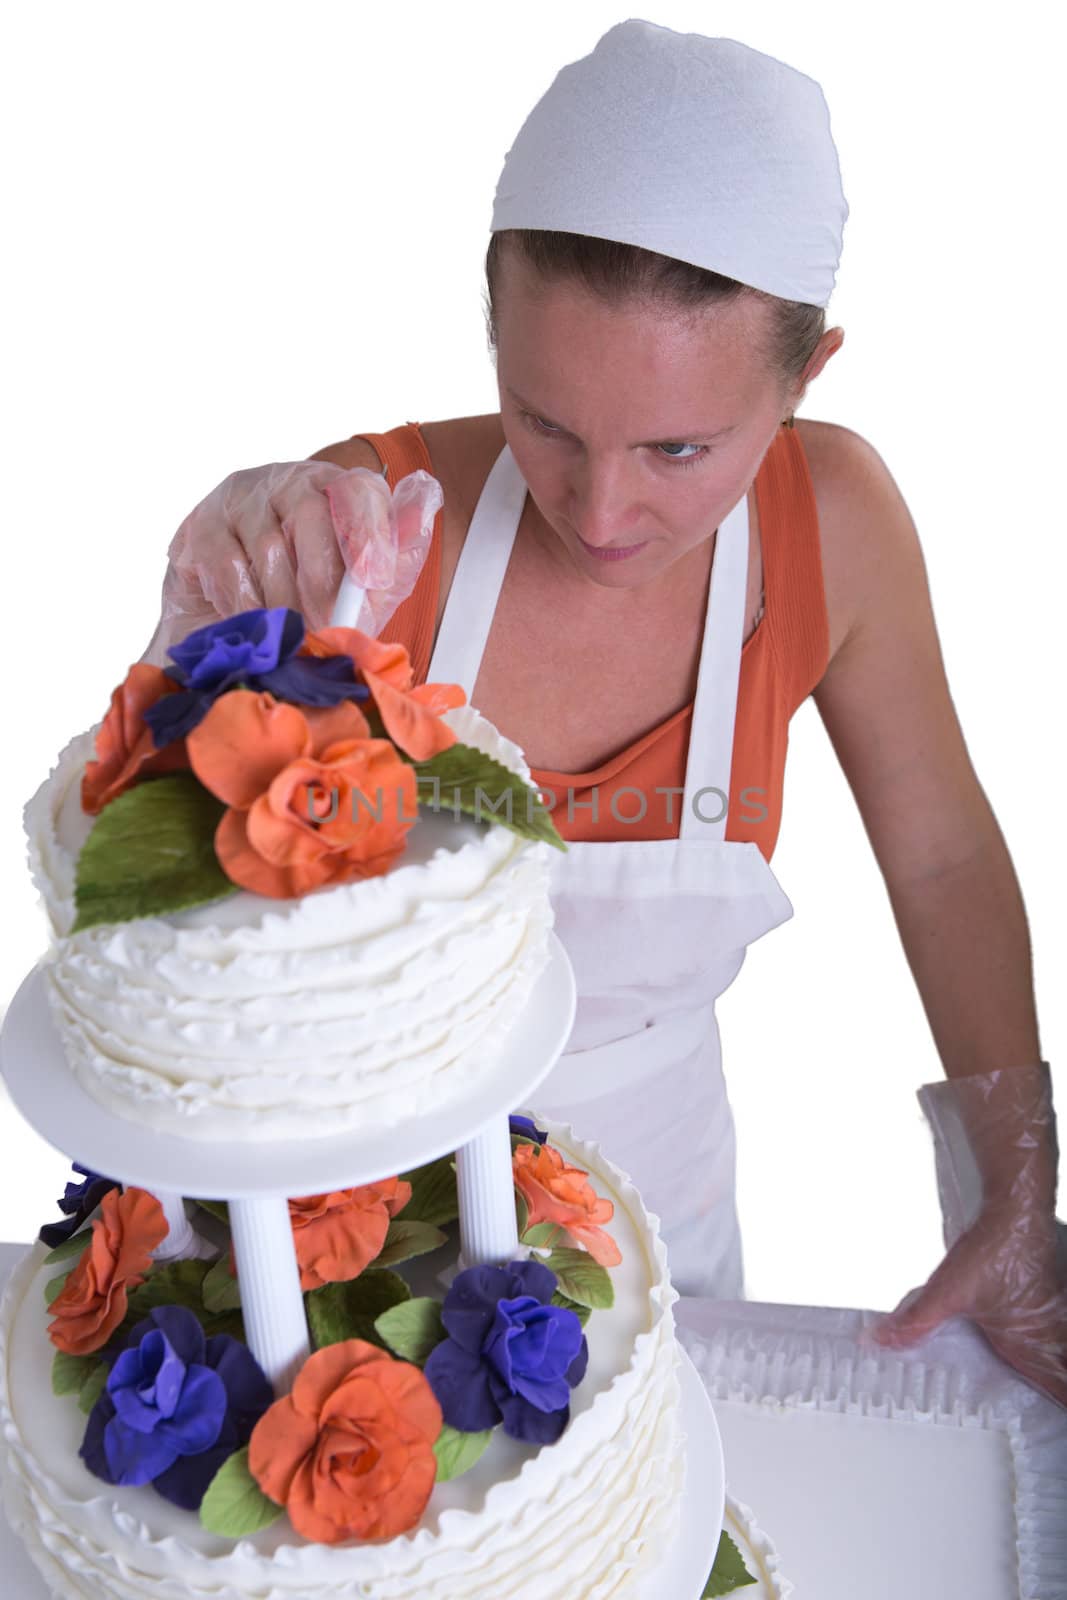 Woman with white bandanna giving to a wedding cake latest small retouches, isolated on white background